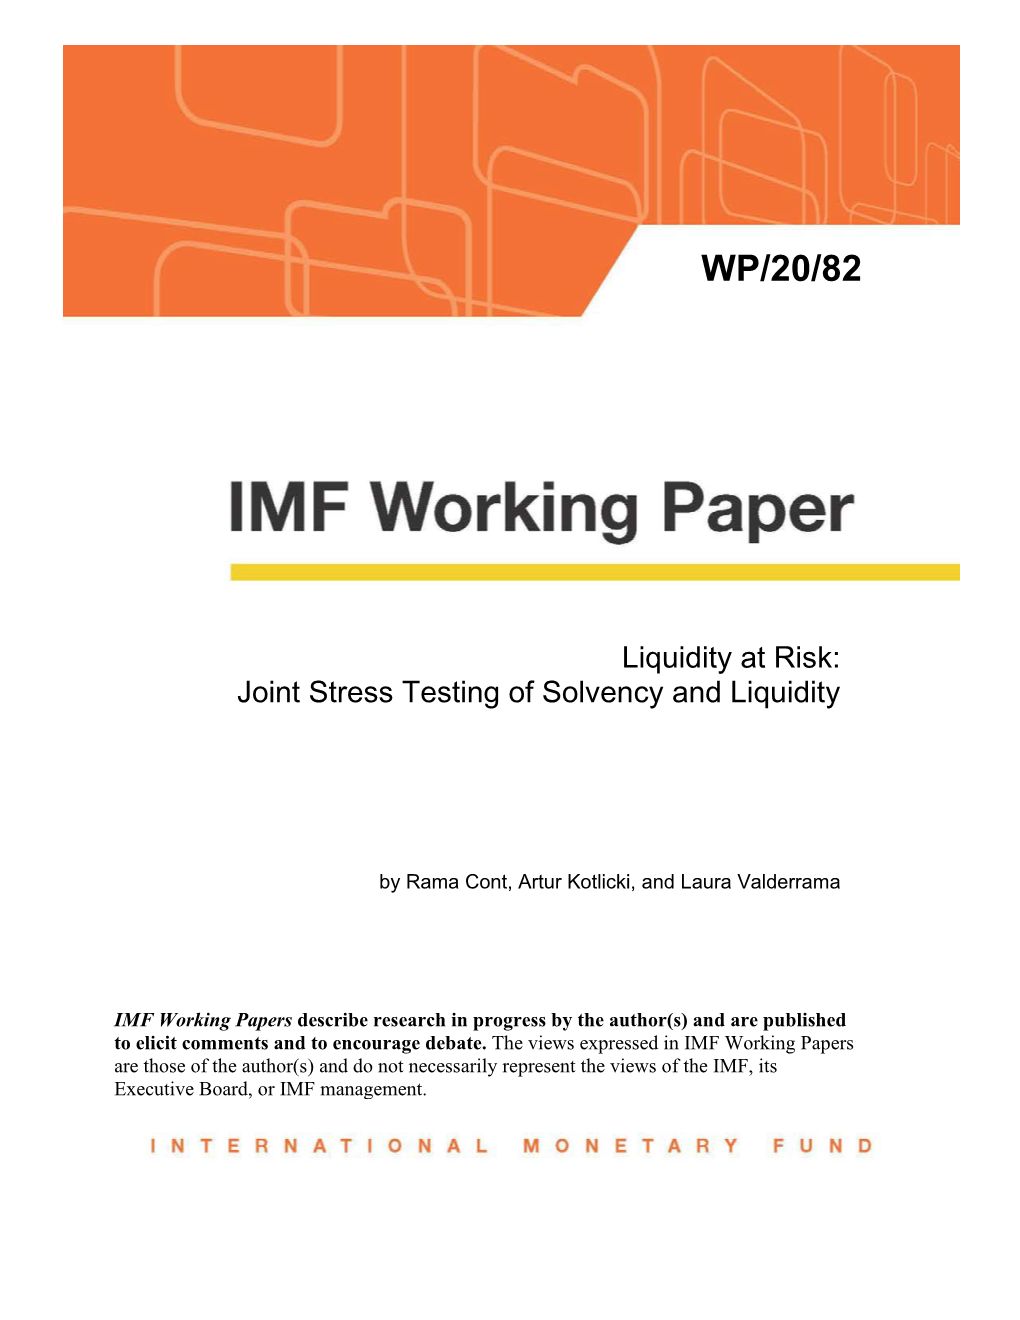 Liquidity at Risk: Joint Stress Testing of Solvency and Liquidity